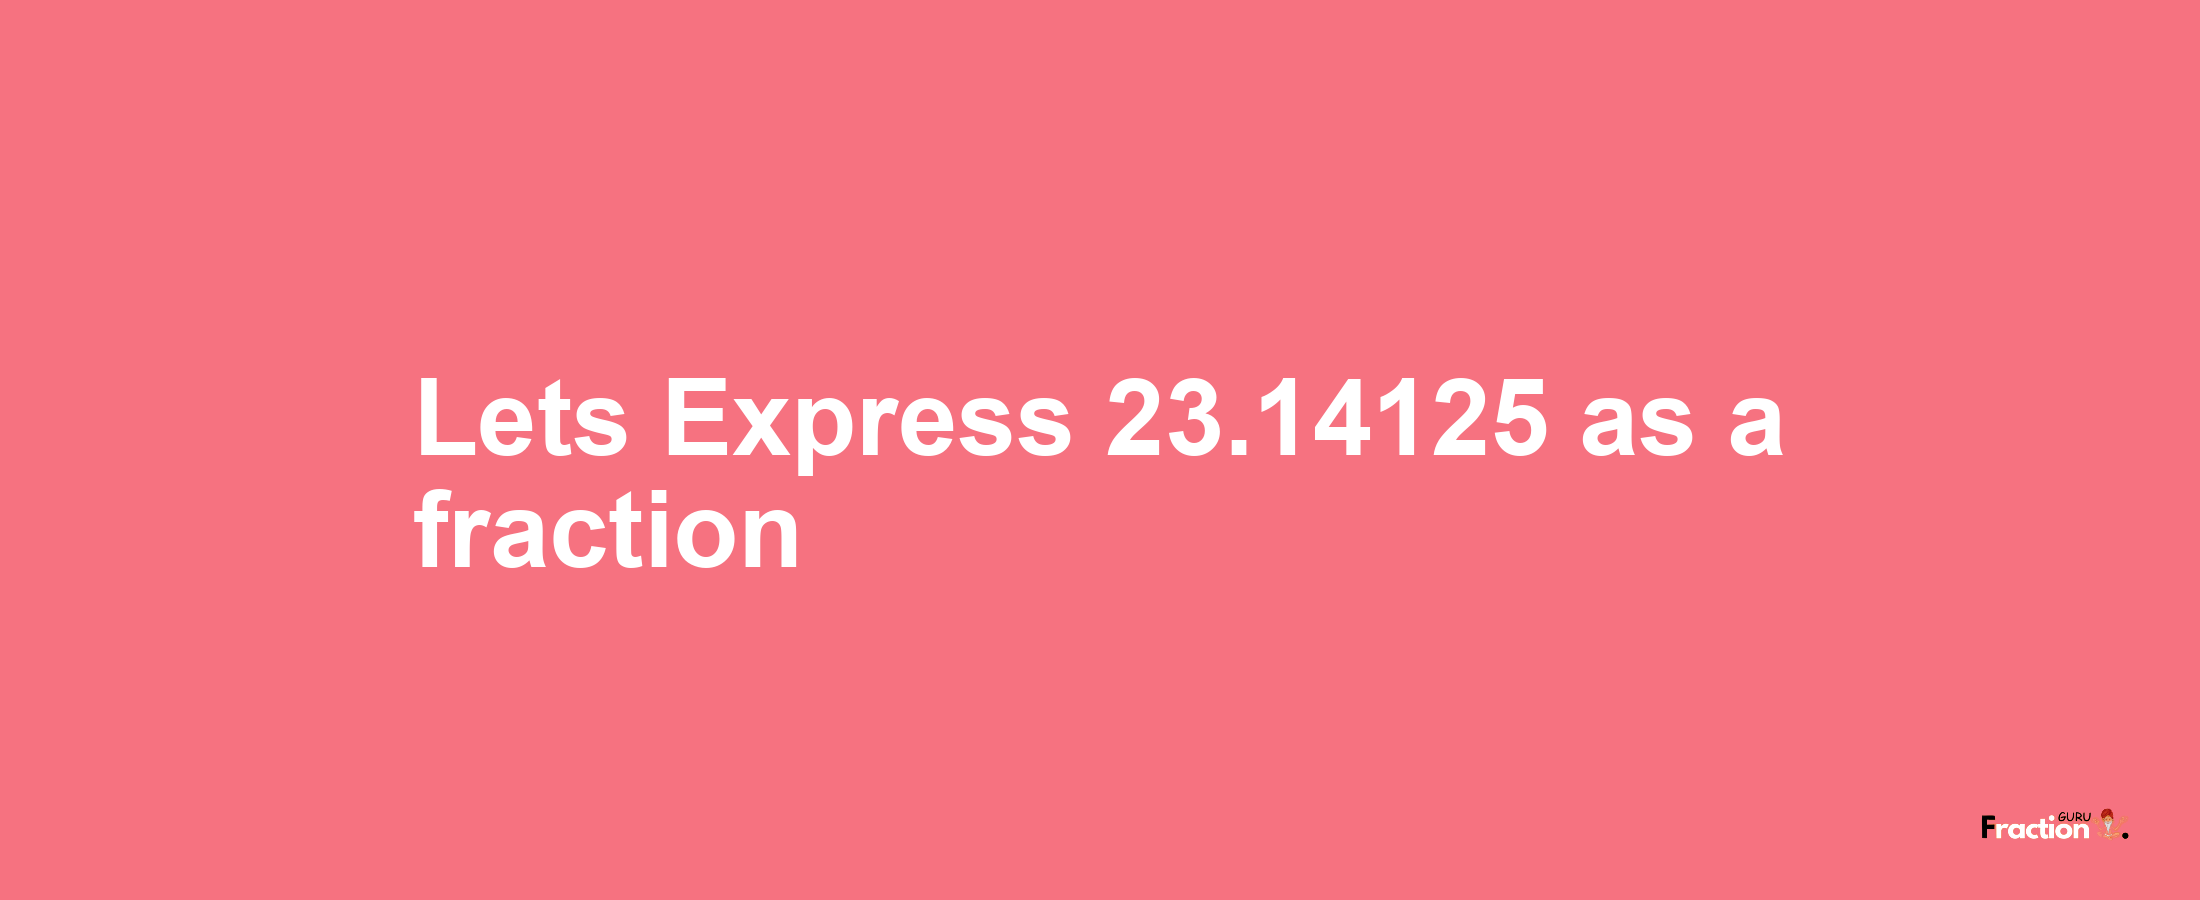 Lets Express 23.14125 as afraction